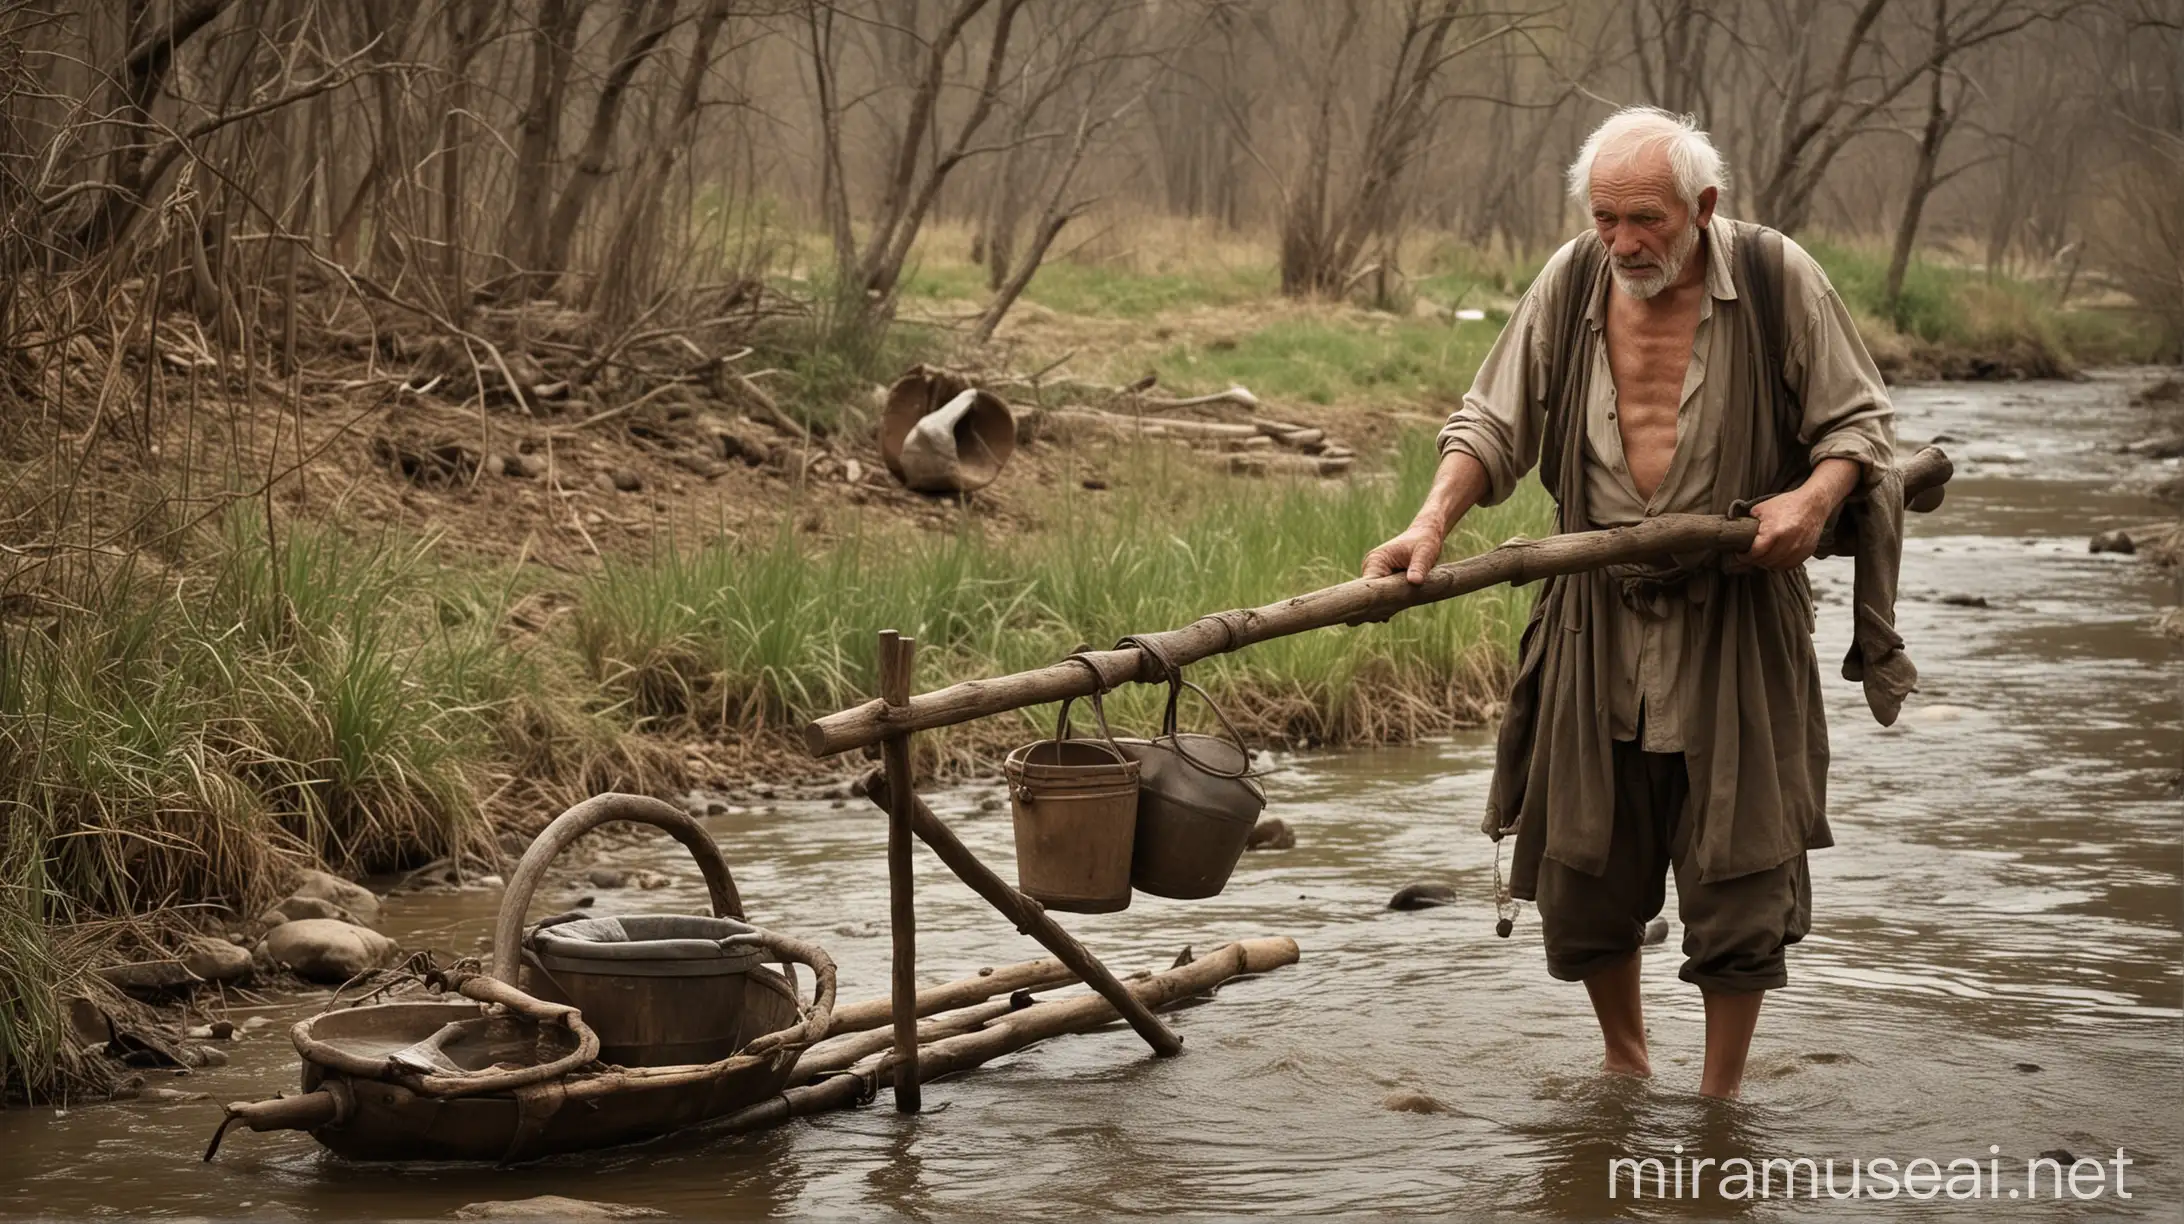 Elderly Man Carrying Water with Two Pots One Strong and One Cracked